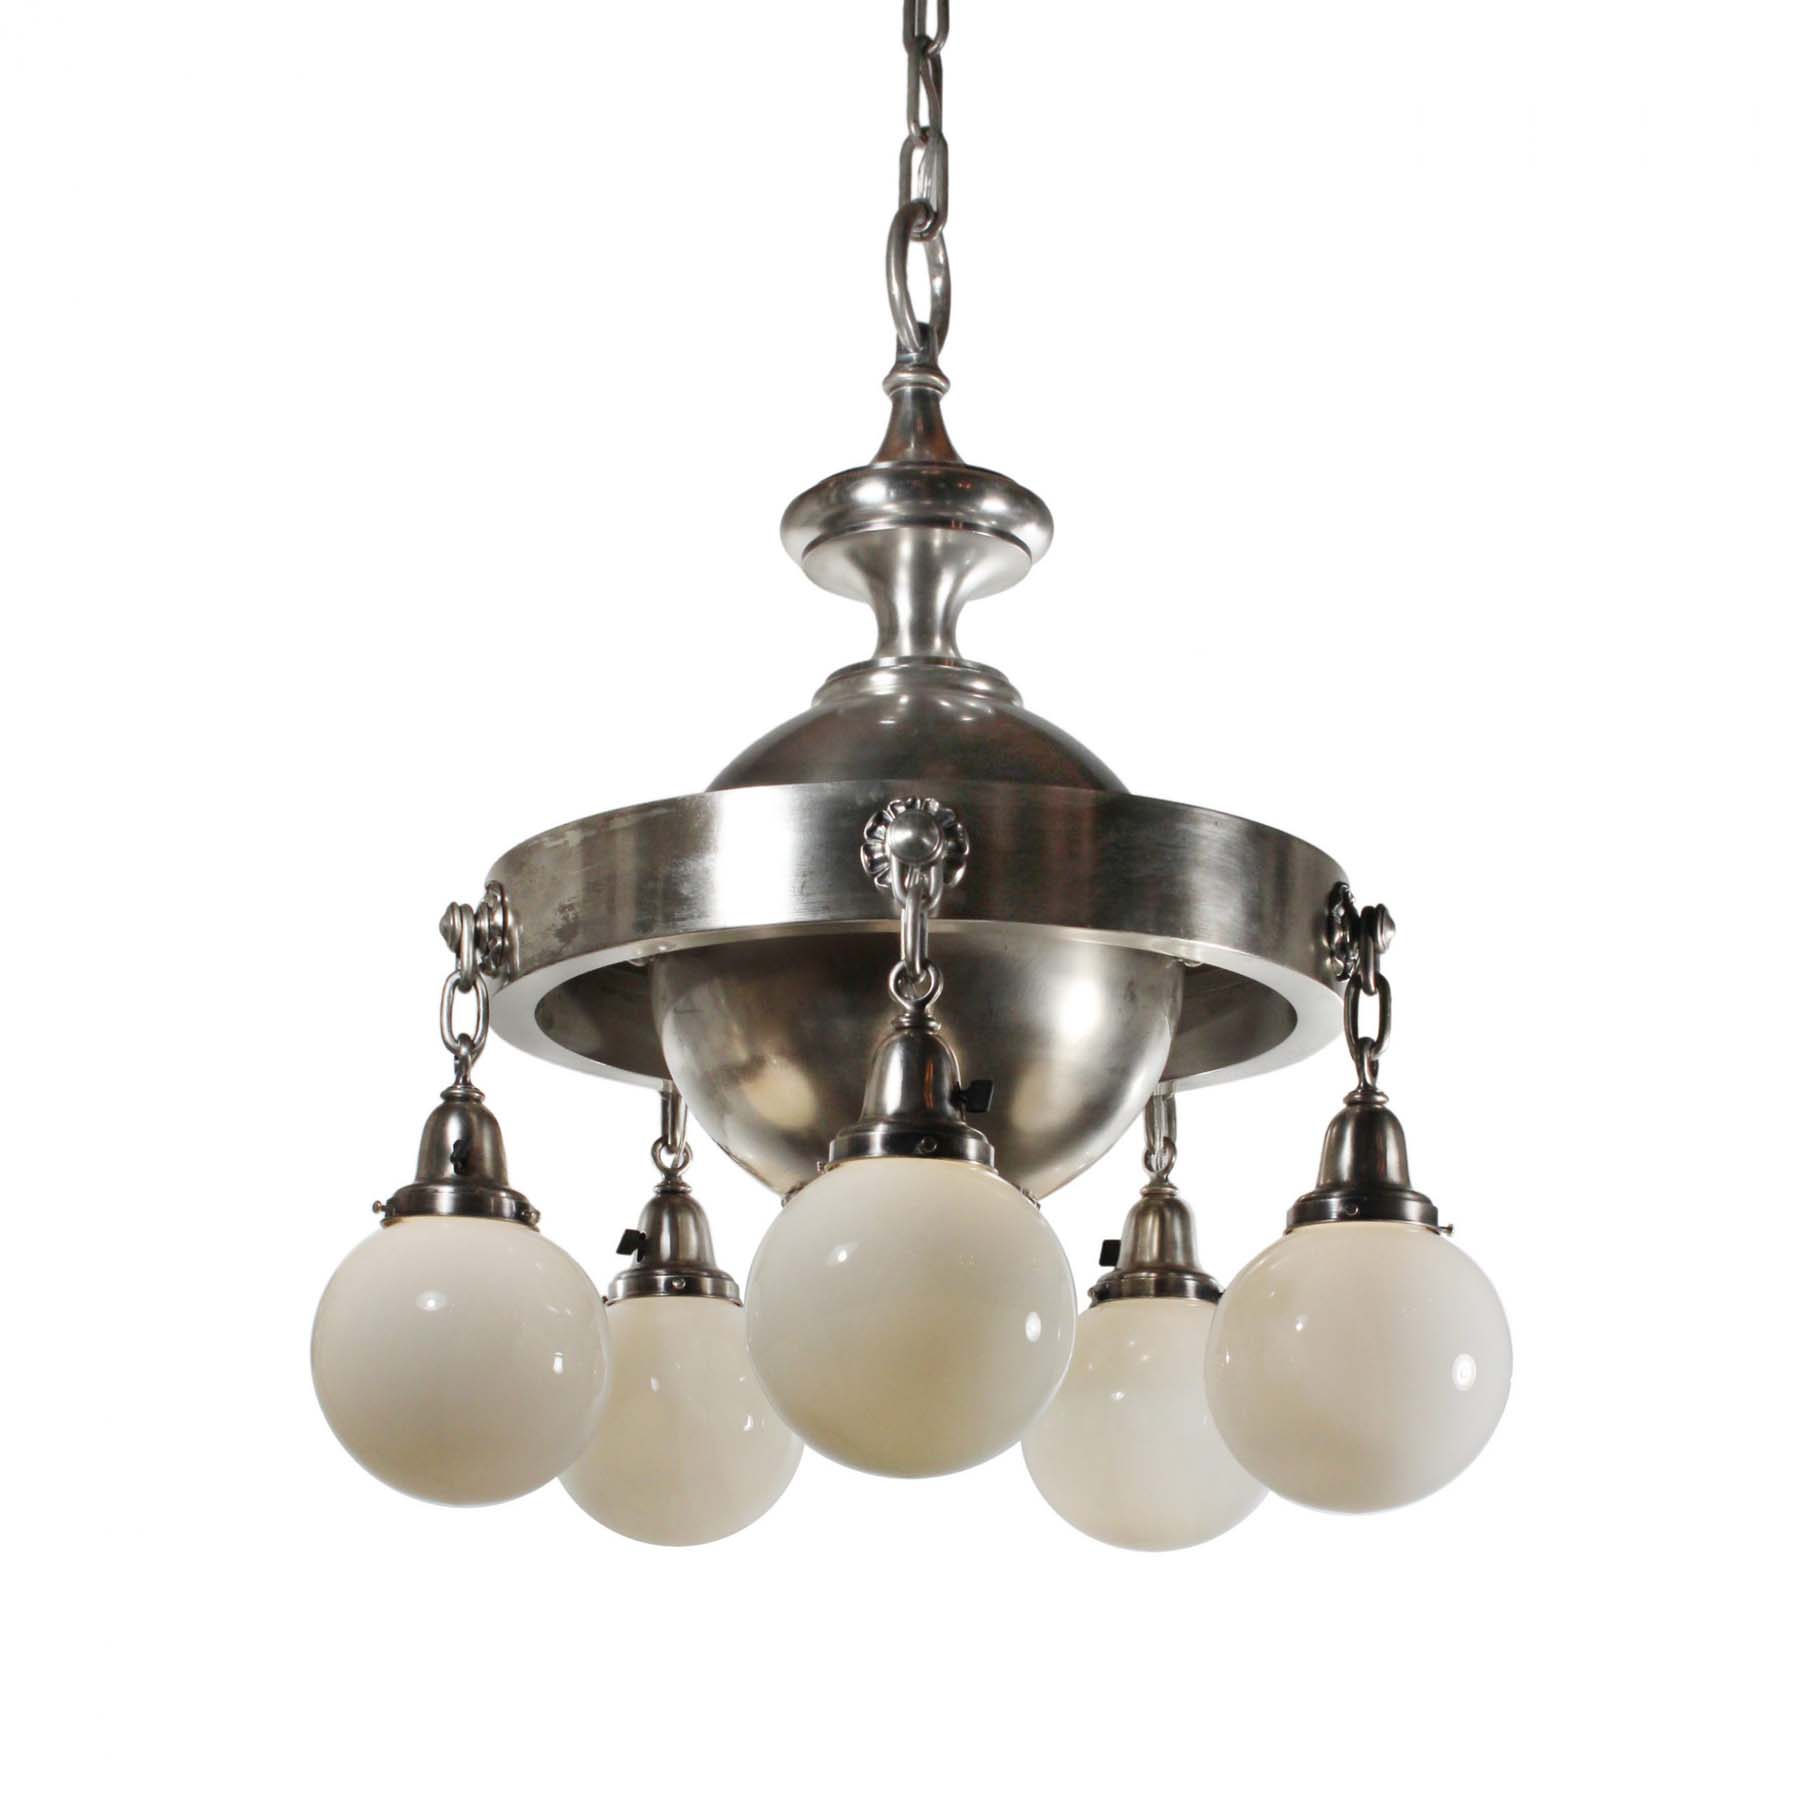 SOLD Substantial Antique Silver Plated Chandelier with Ball Shades-0